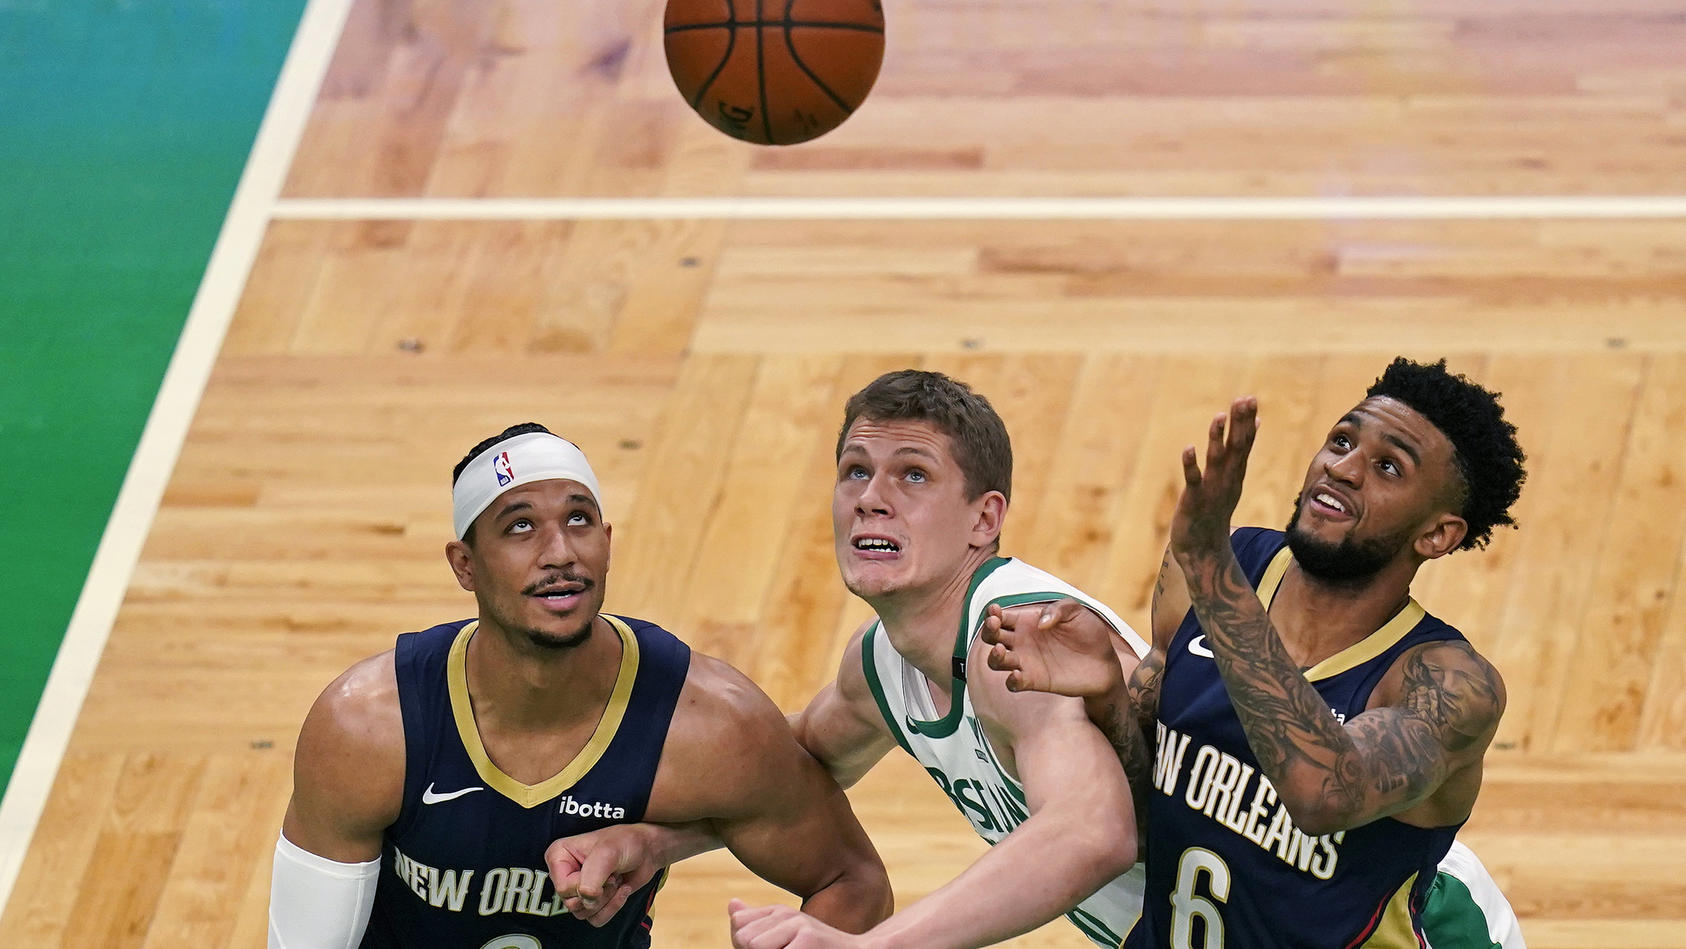 Boston Celtics forward Moritz Wagner, center, is boxed out by New Orleans Pelicans' Josh Hart, left, and Nickeil Alexander-Walker, right, during the first half of an NBA basketball game, Monday, March 29, 2021, in Boston. (AP Photo/Charles Krupa)